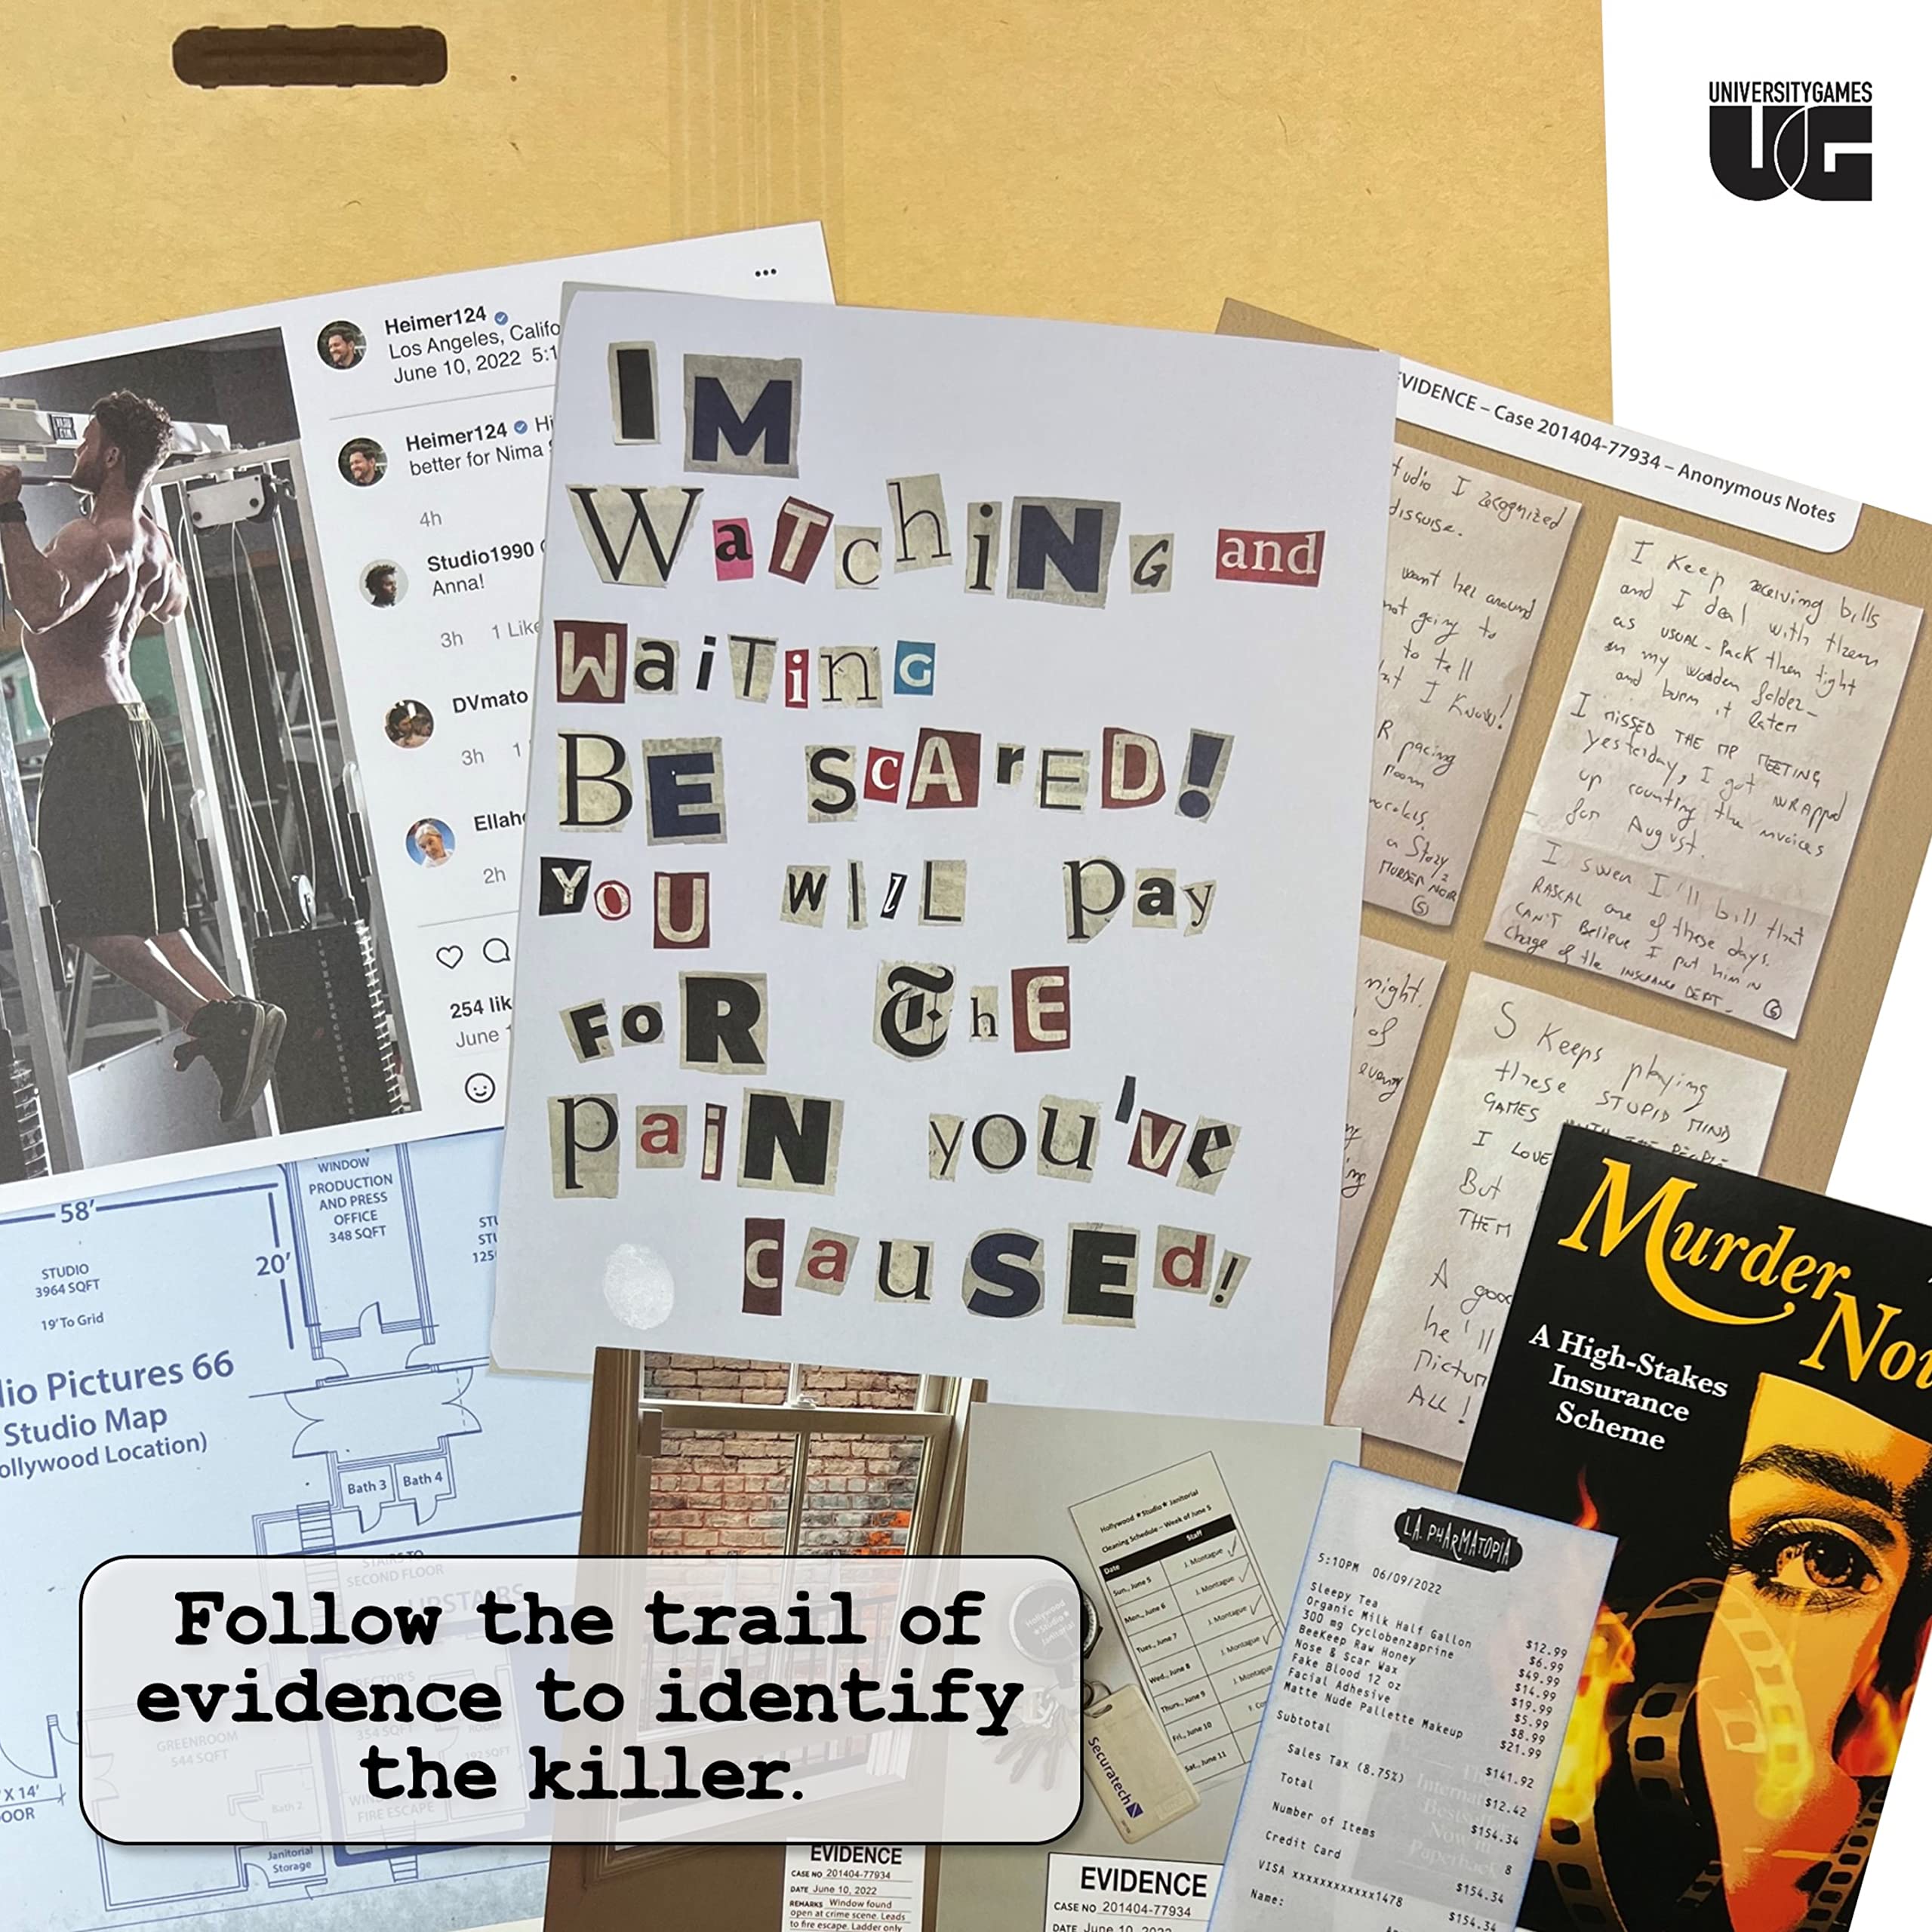 Murder Mystery Party | Case Files Murder Noir Unsolved Mystery Game, for 1 or More Players Ages 14+